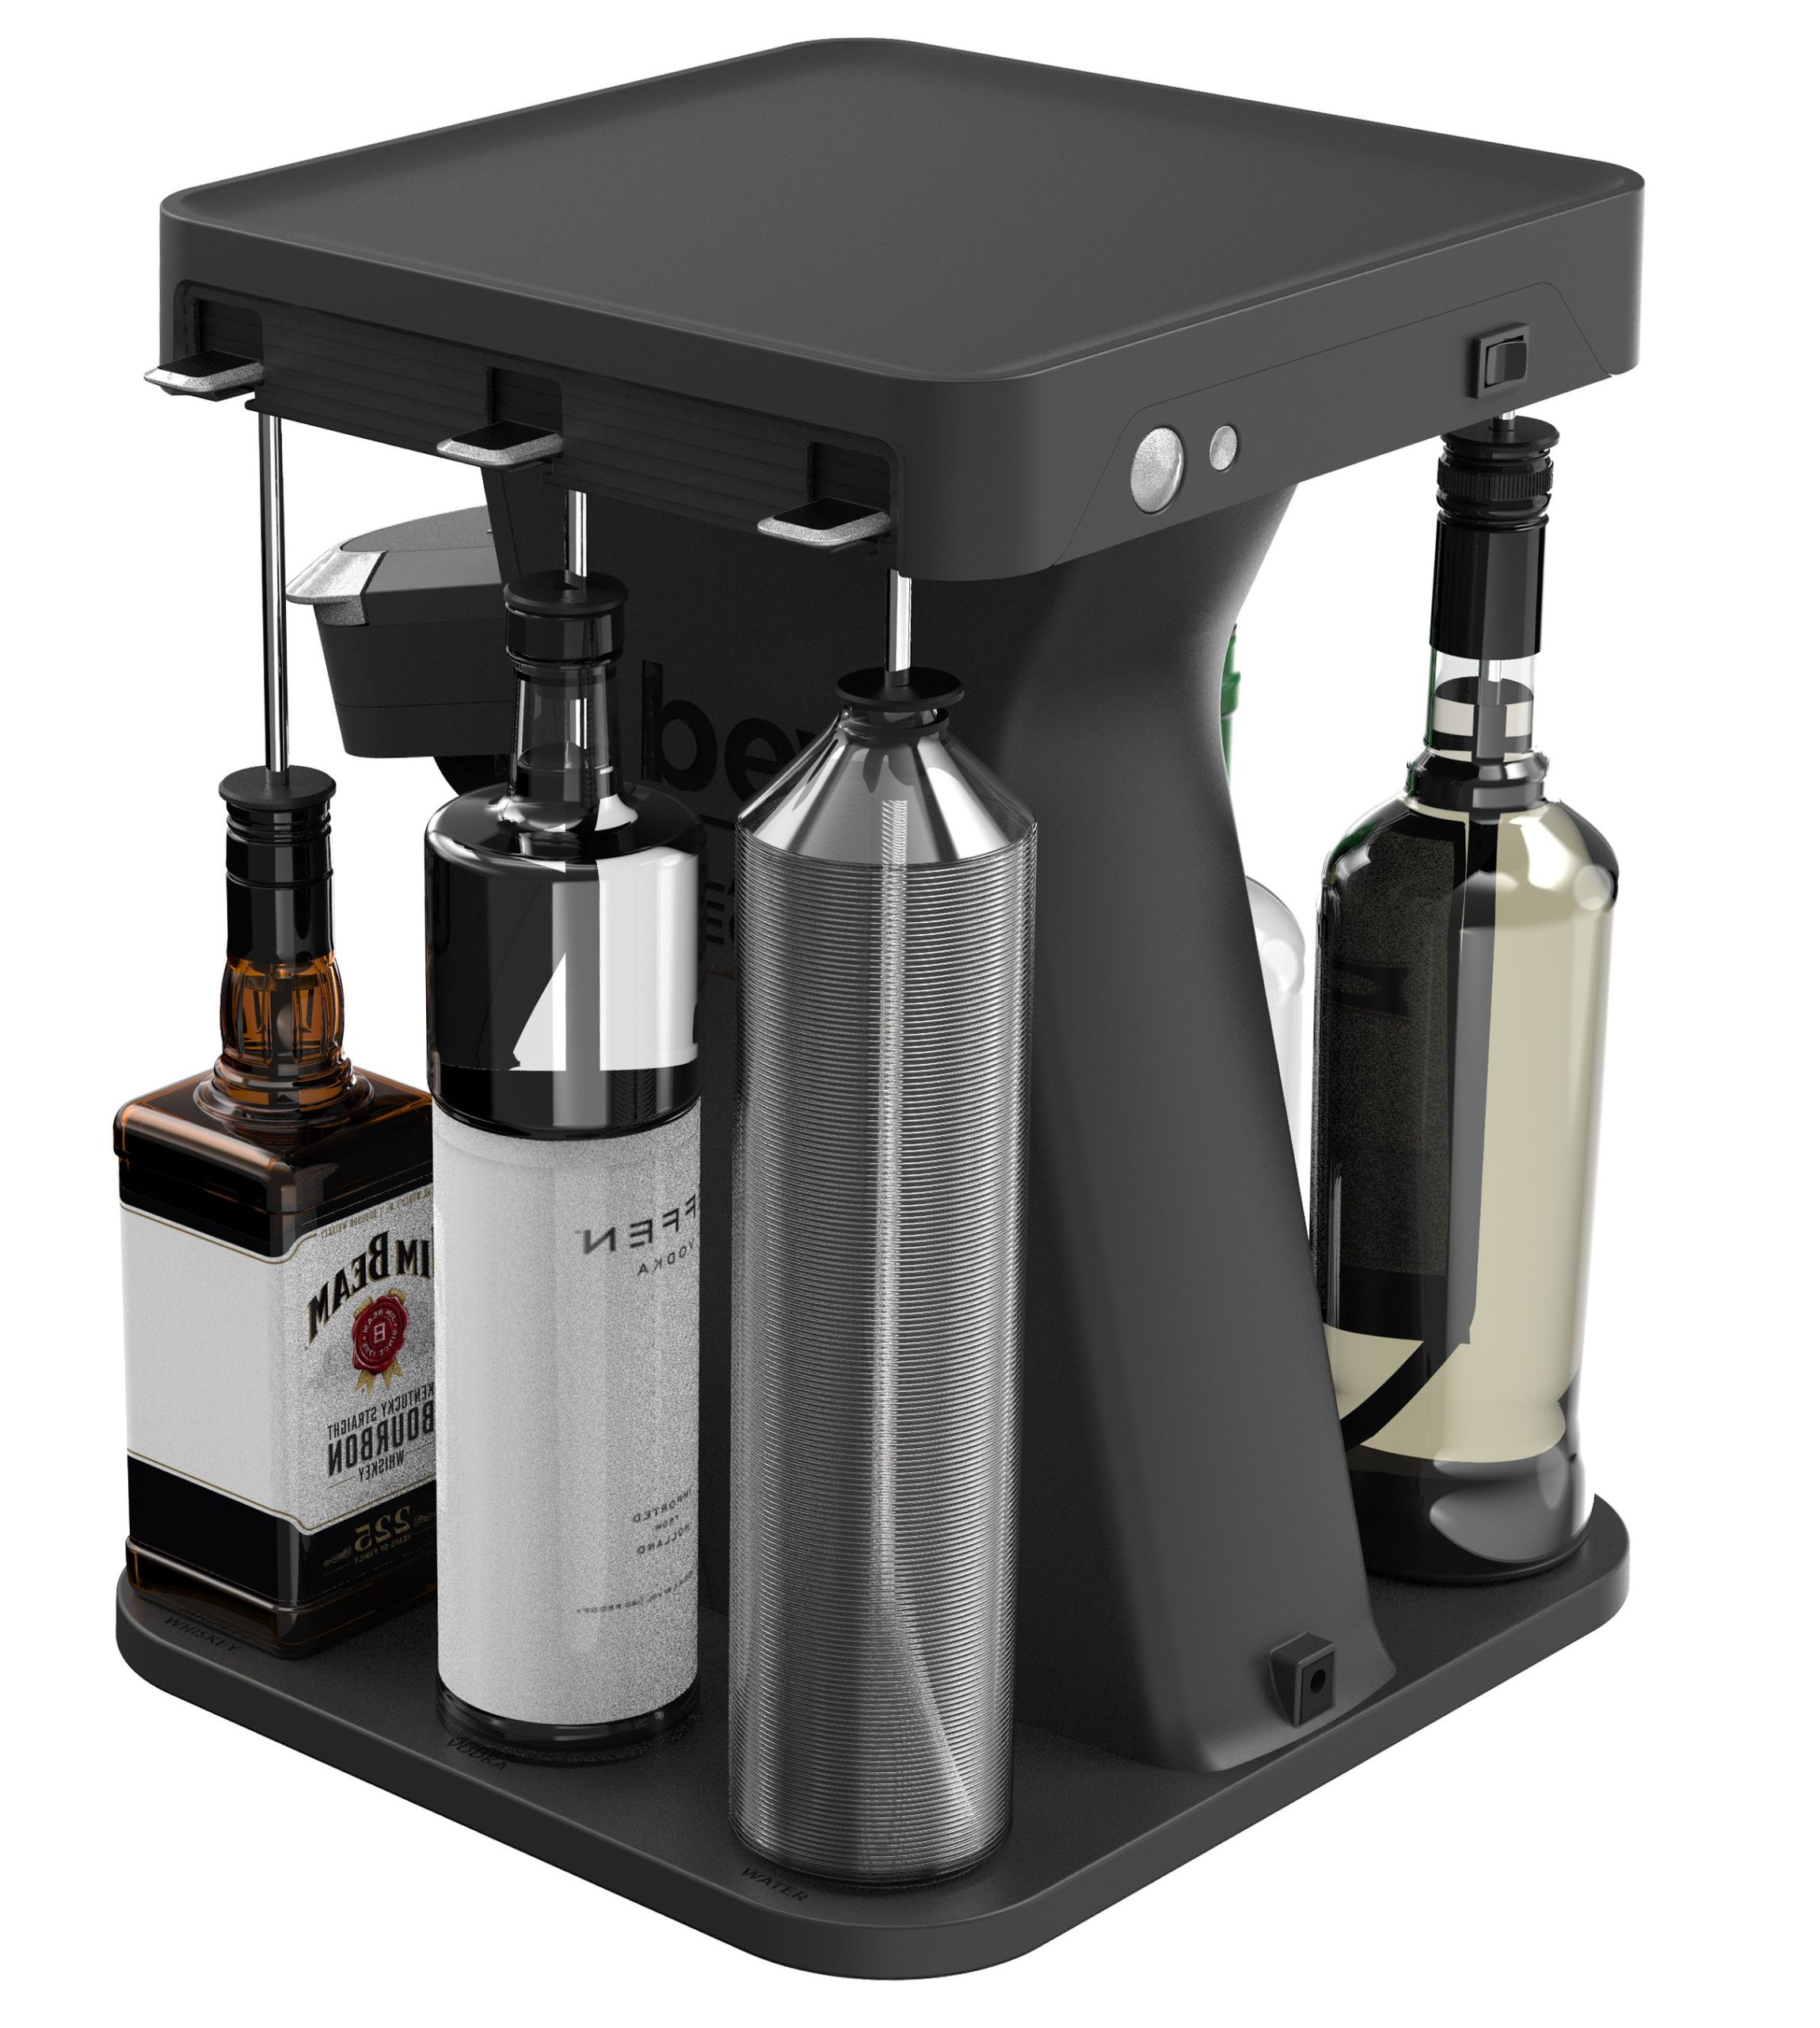 How difficult is it to clean the Bev Black+Decker Cocktail Maker